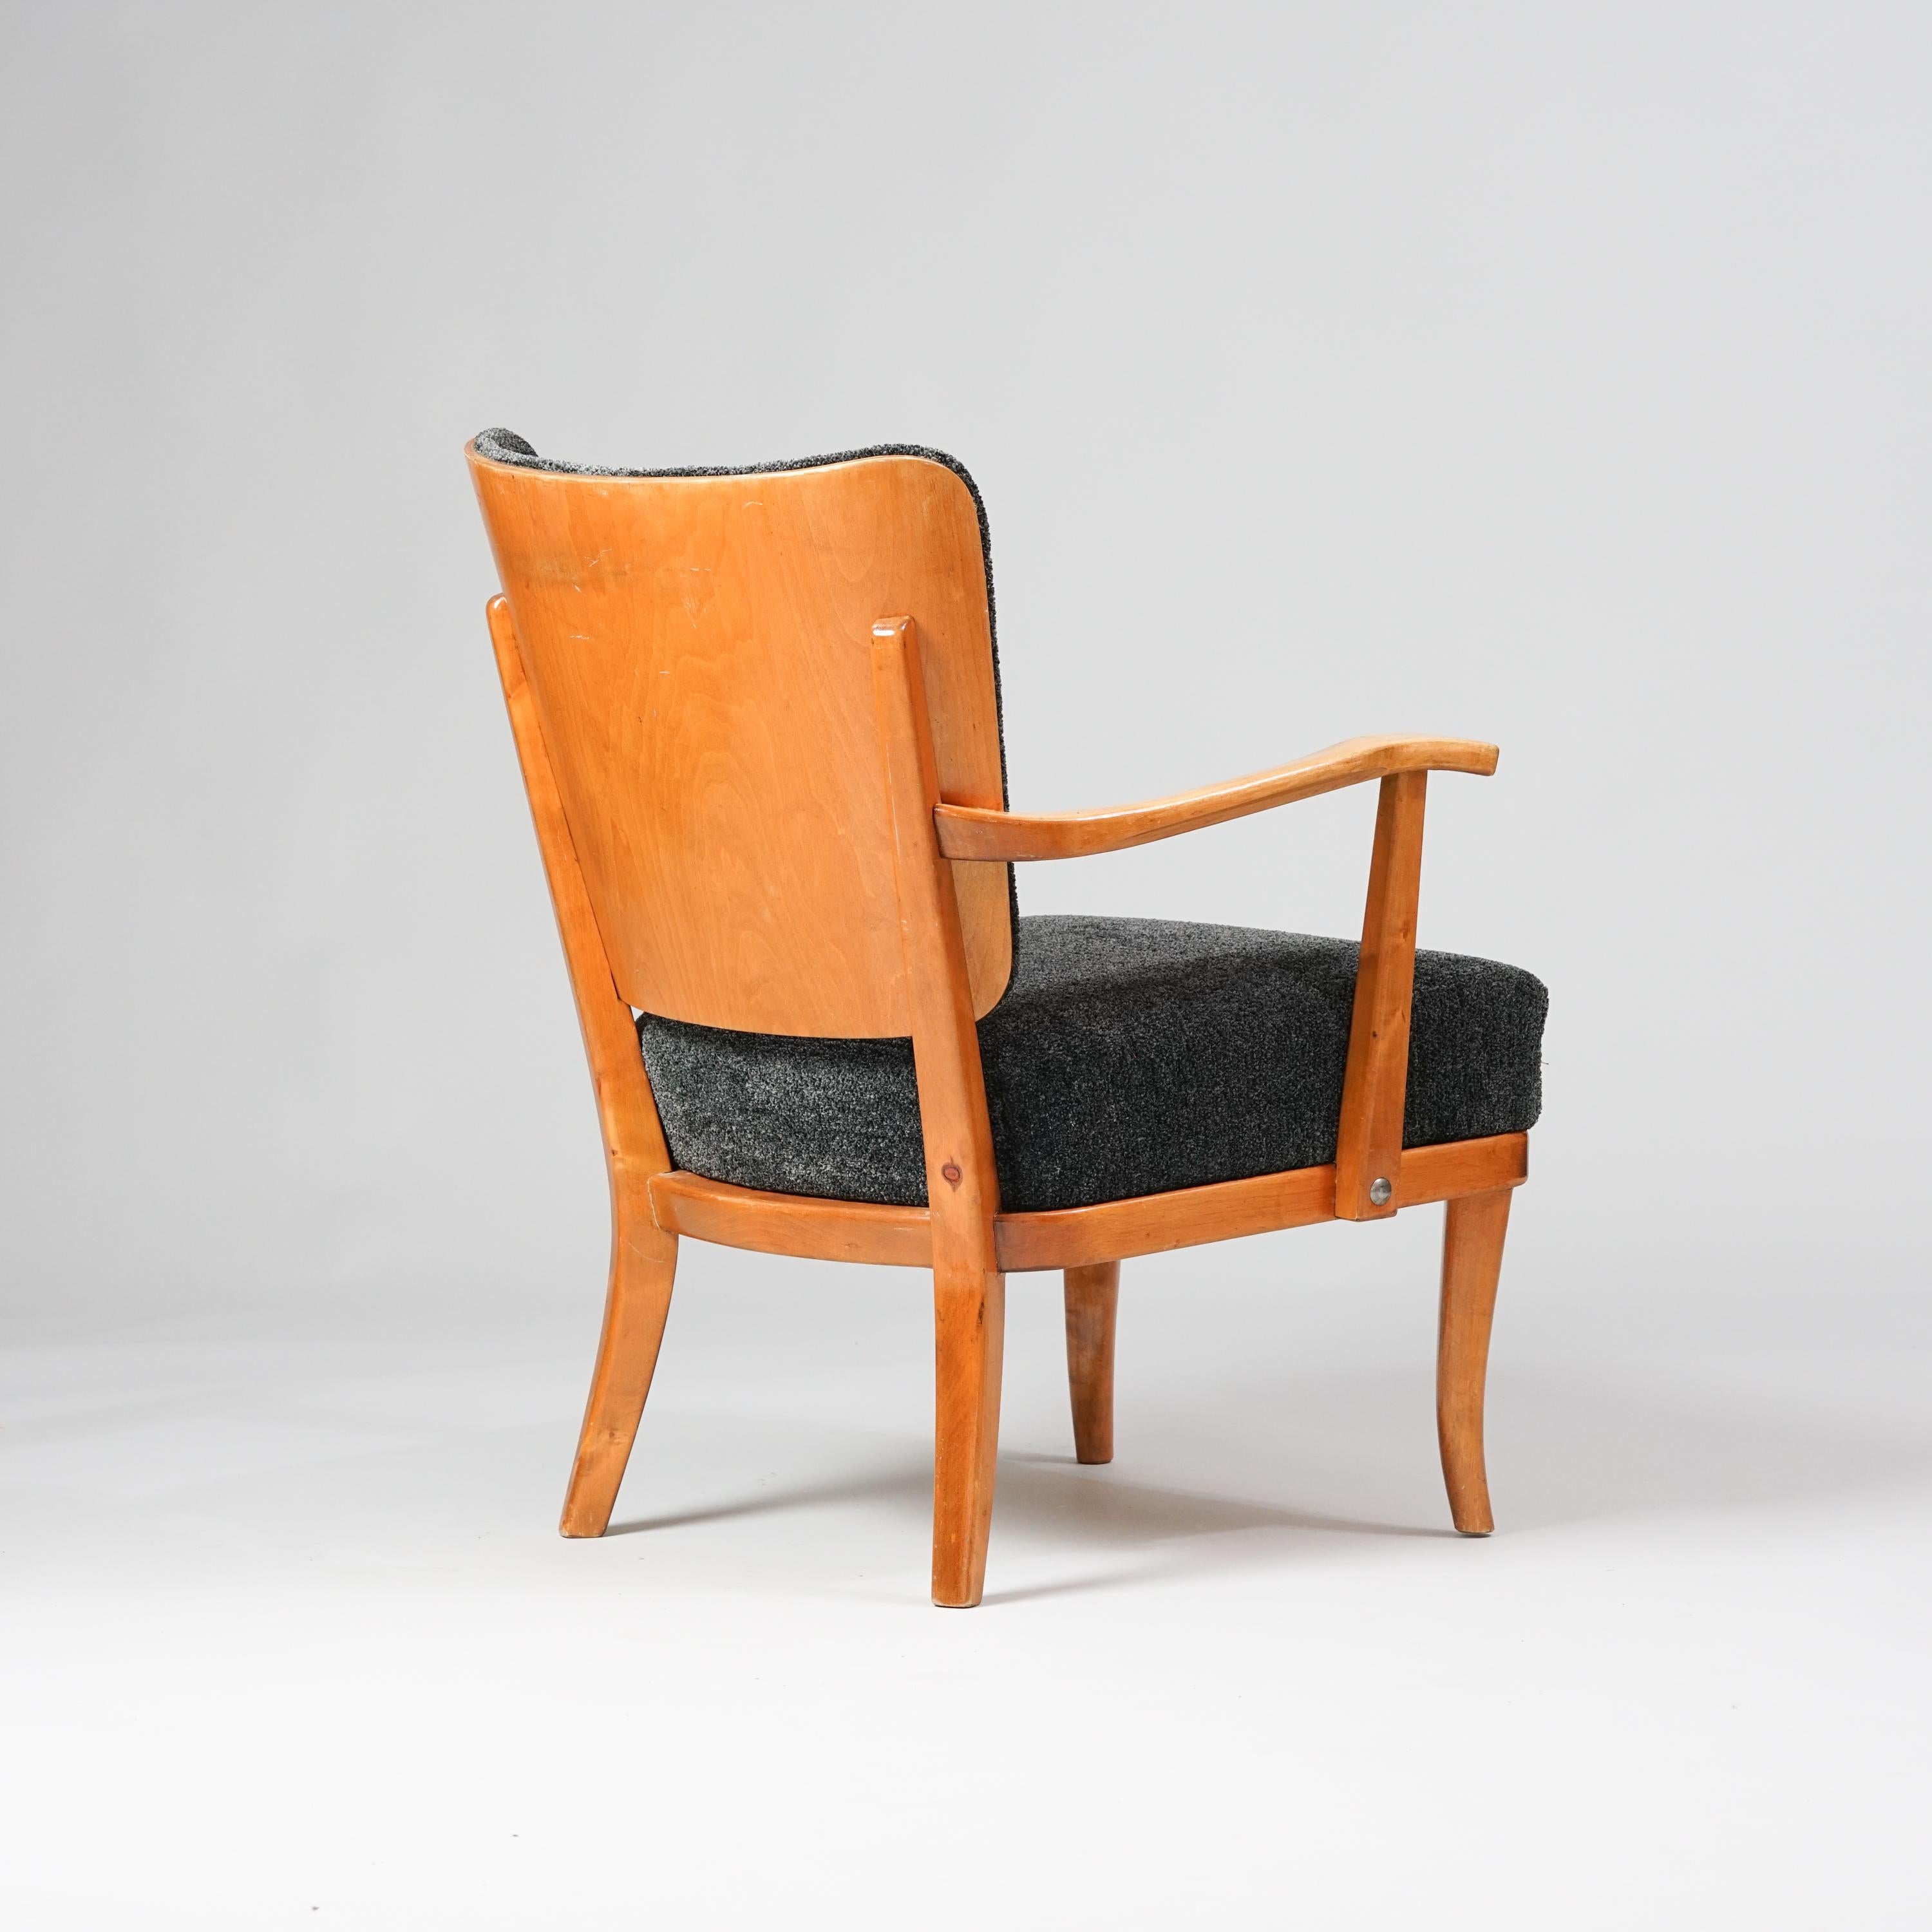 This elegant armchair was designed by Einari Kyöstilä in the 1940s or 1950s. It is made of birch and birch plywood, and it has been reupholstered with a quality fabric. The armchair is in good vintage condition, with some minor patina and wear